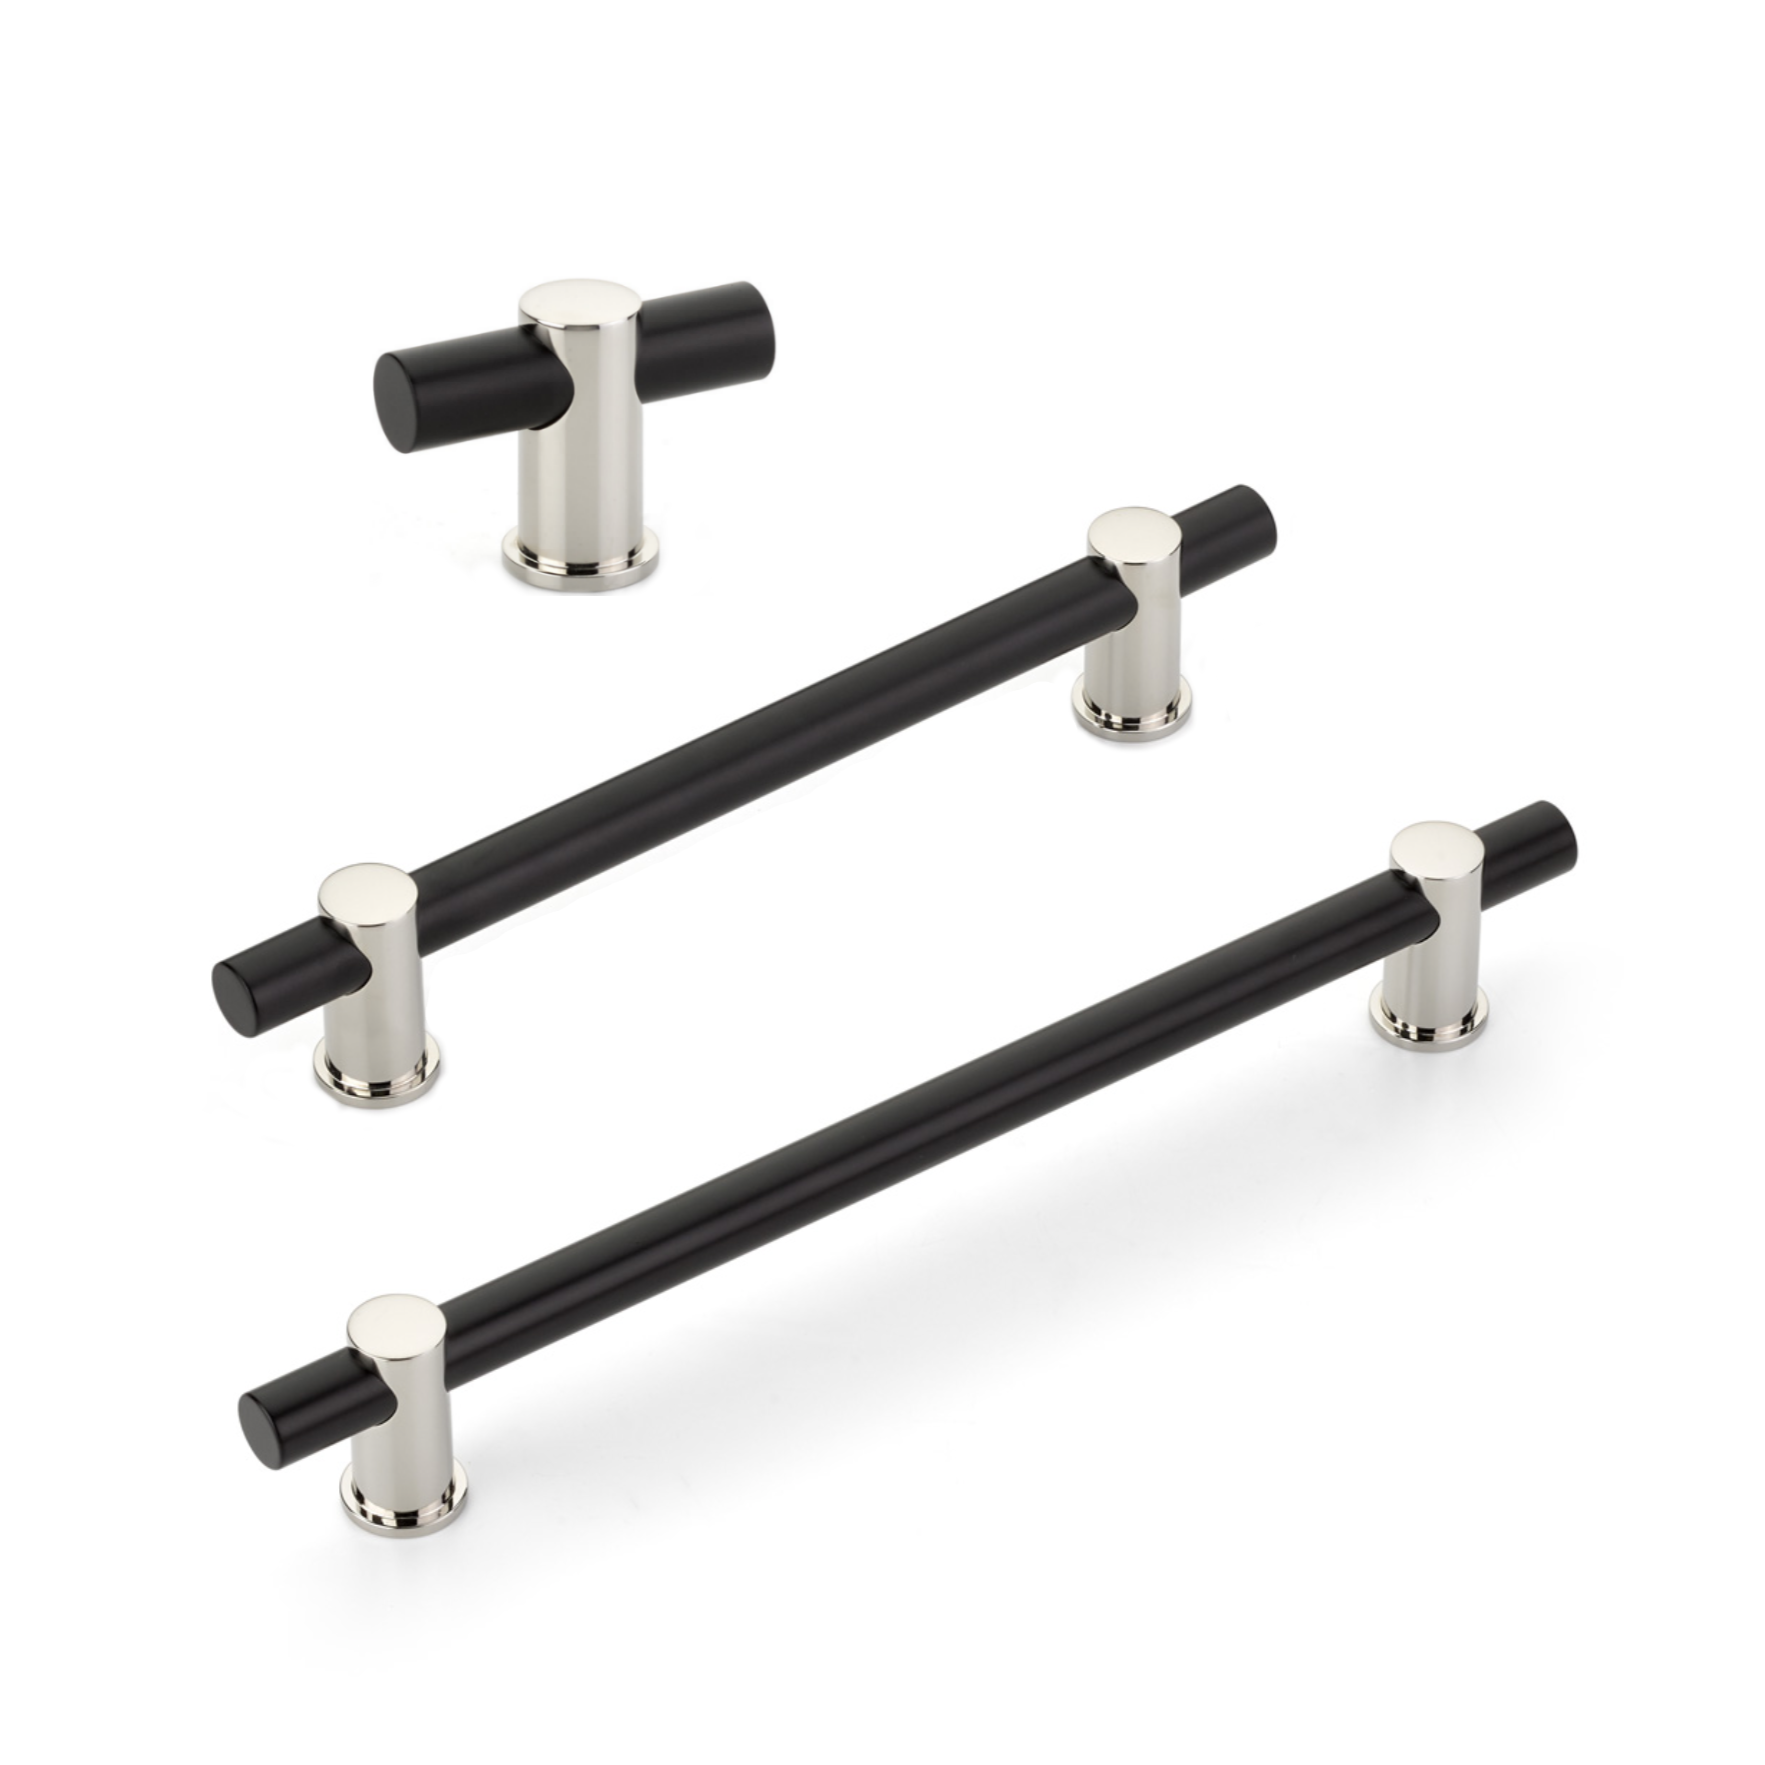 Matte Black and Polished Nickel "Fonce" Round T-Bar Cabinet Knobs and Drawer Pulls - Brass Cabinet Hardware 